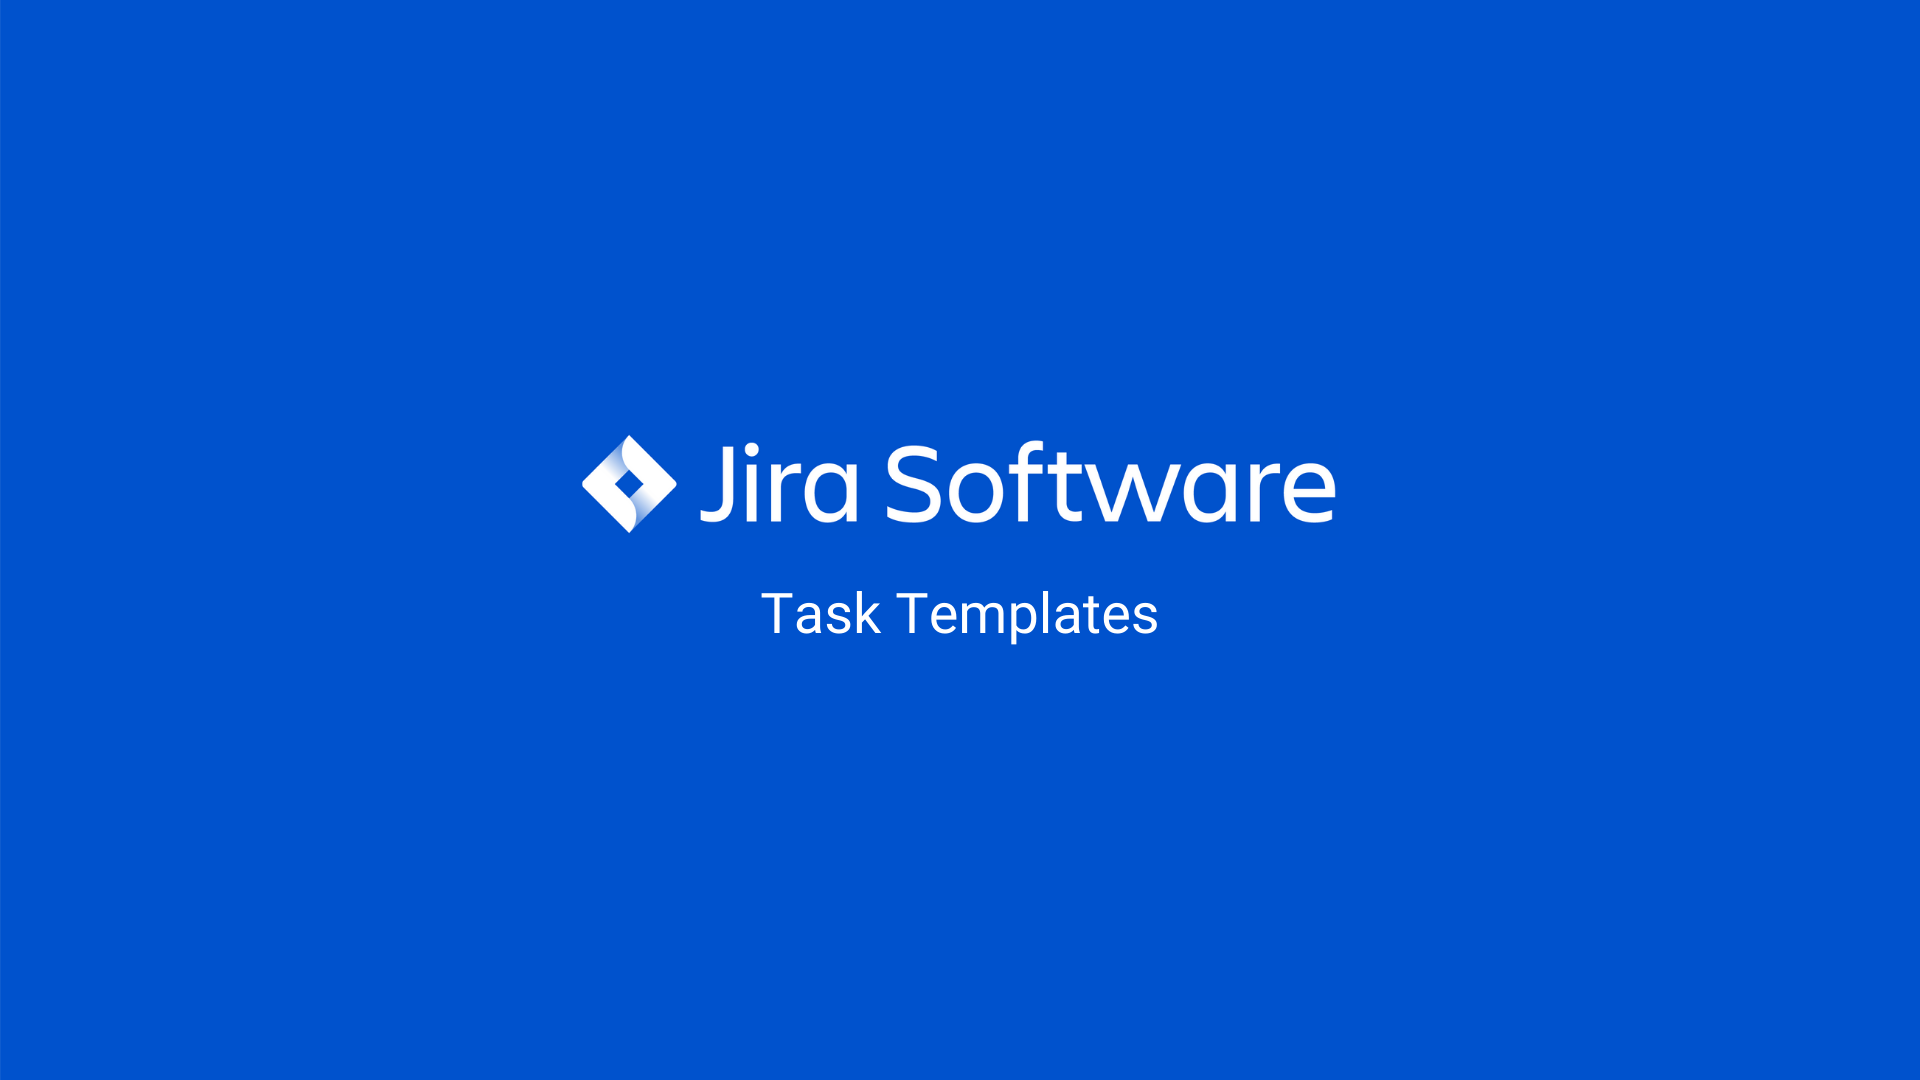 Get organized with these Jira task templates